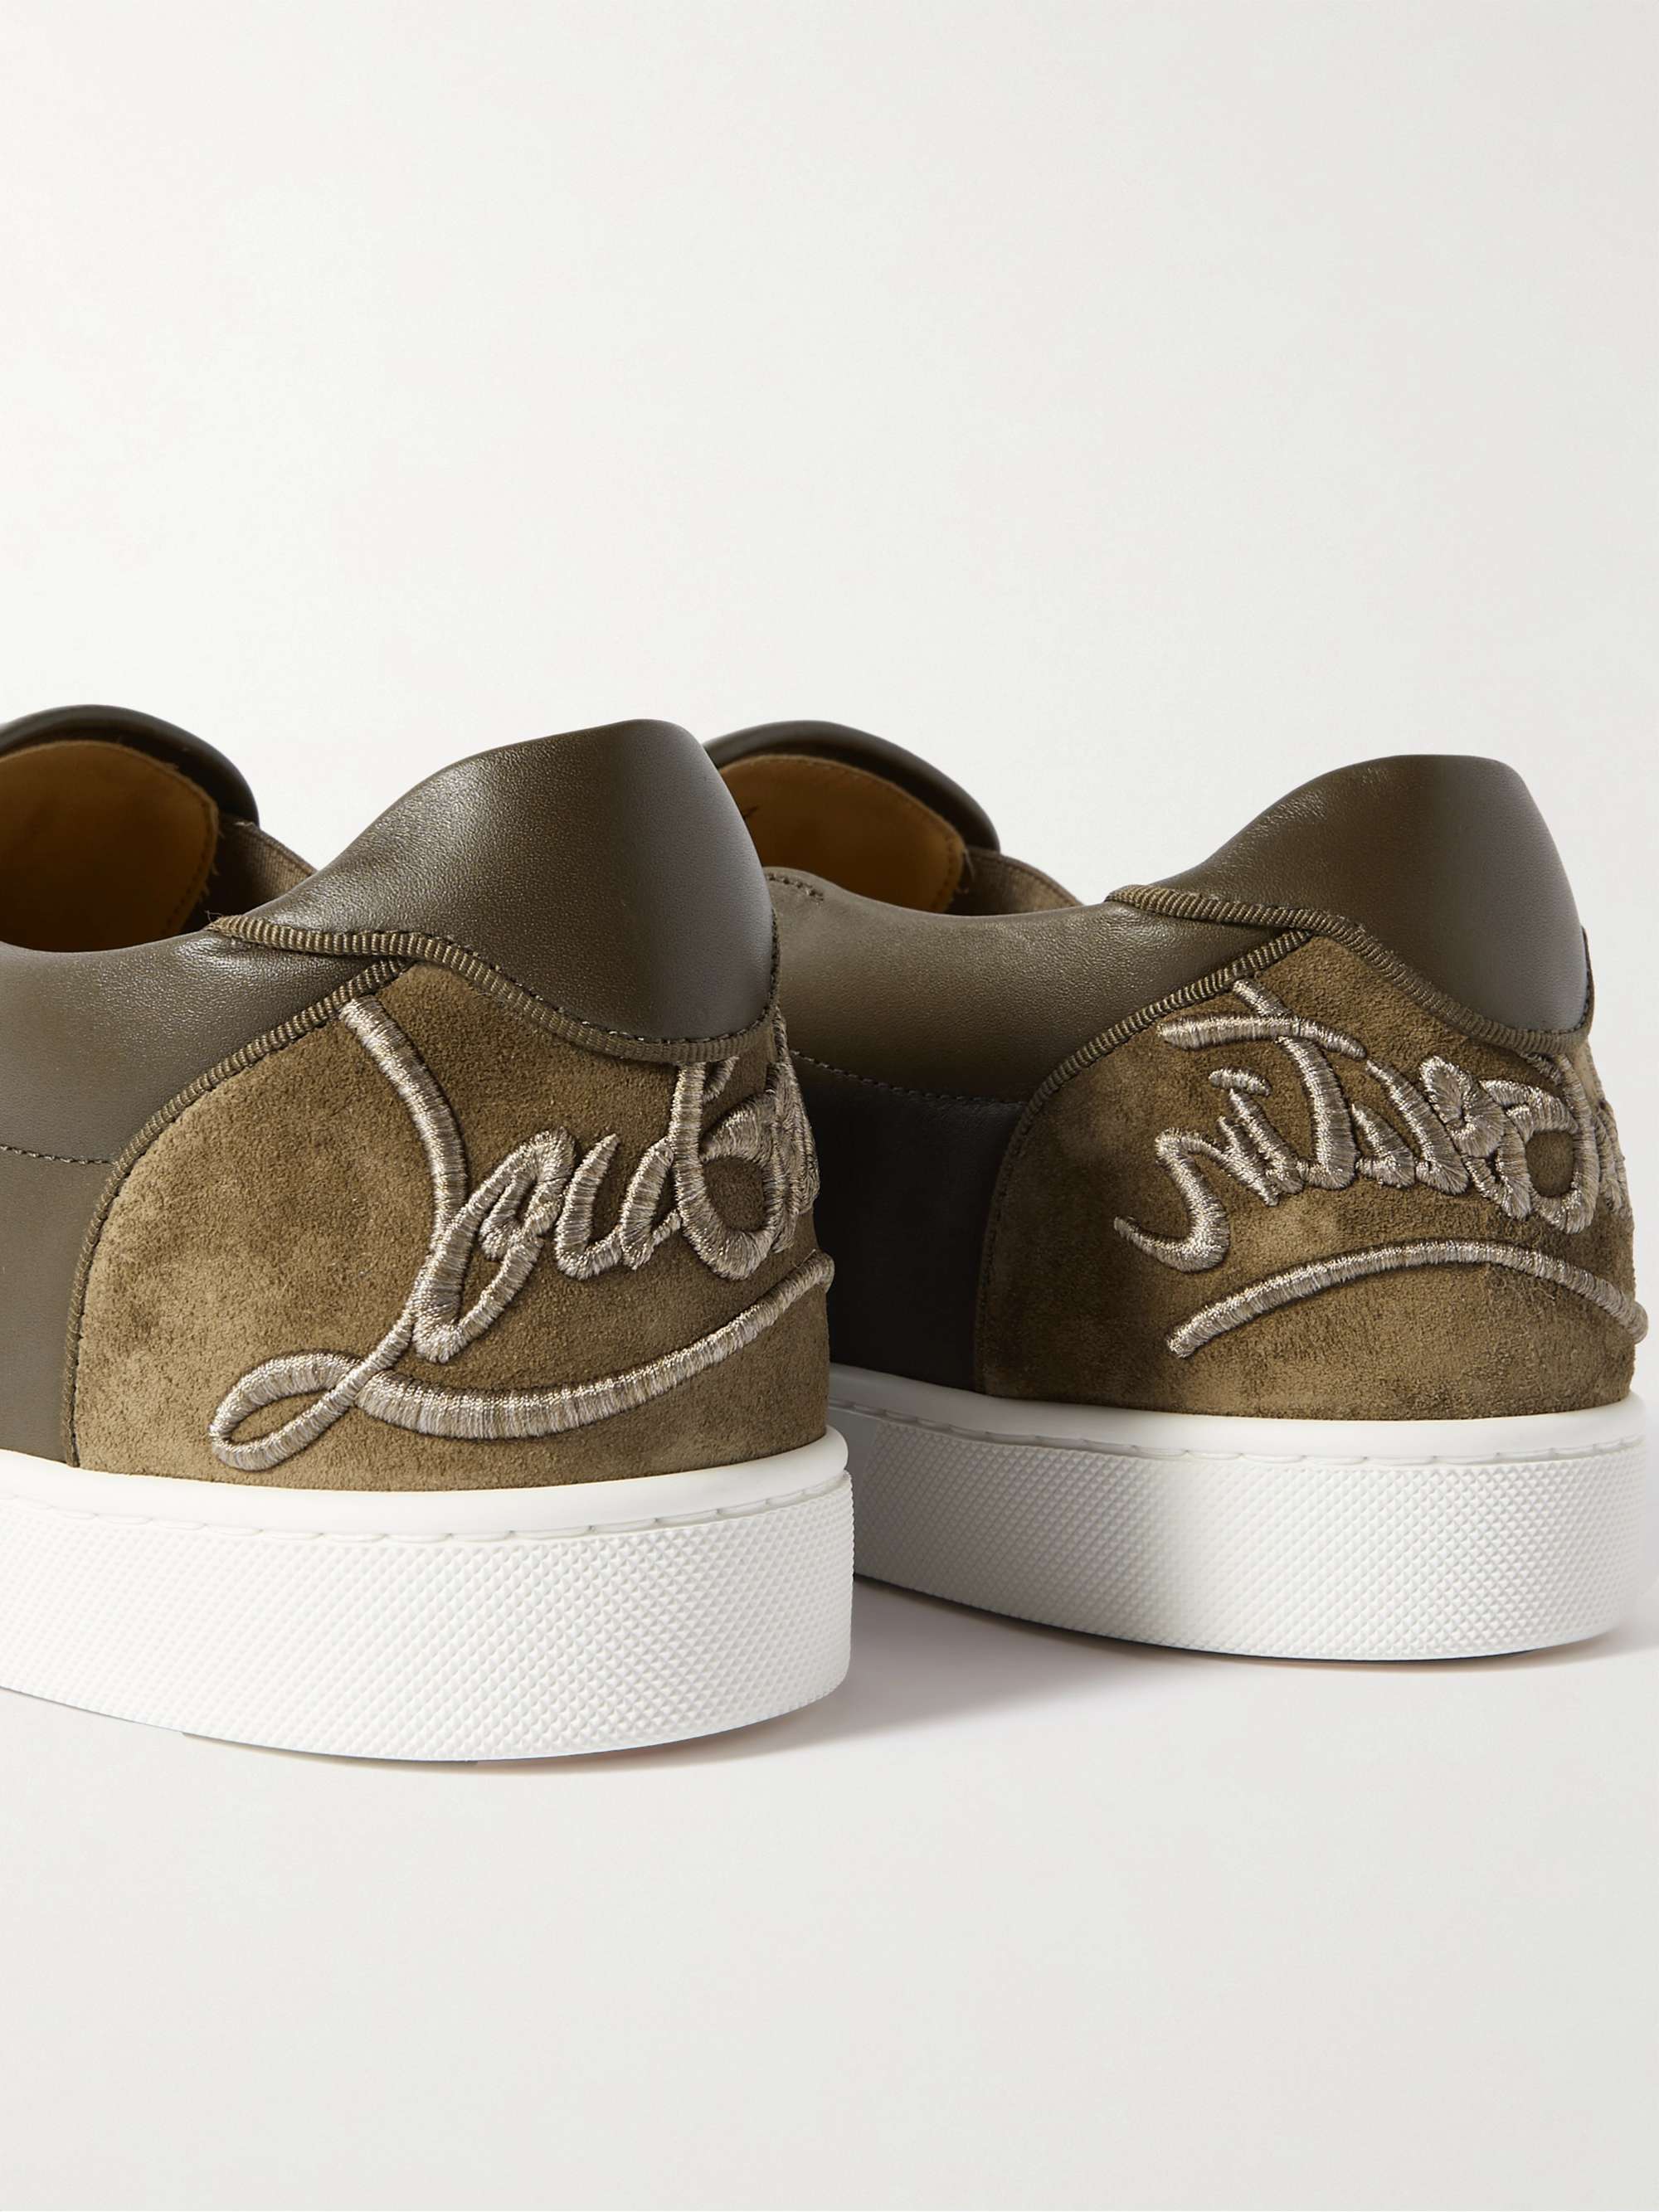 CHRISTIAN LOUBOUTIN Fun Sailor Leather-Trimmed Perforated Suede Slip-On Sneakers